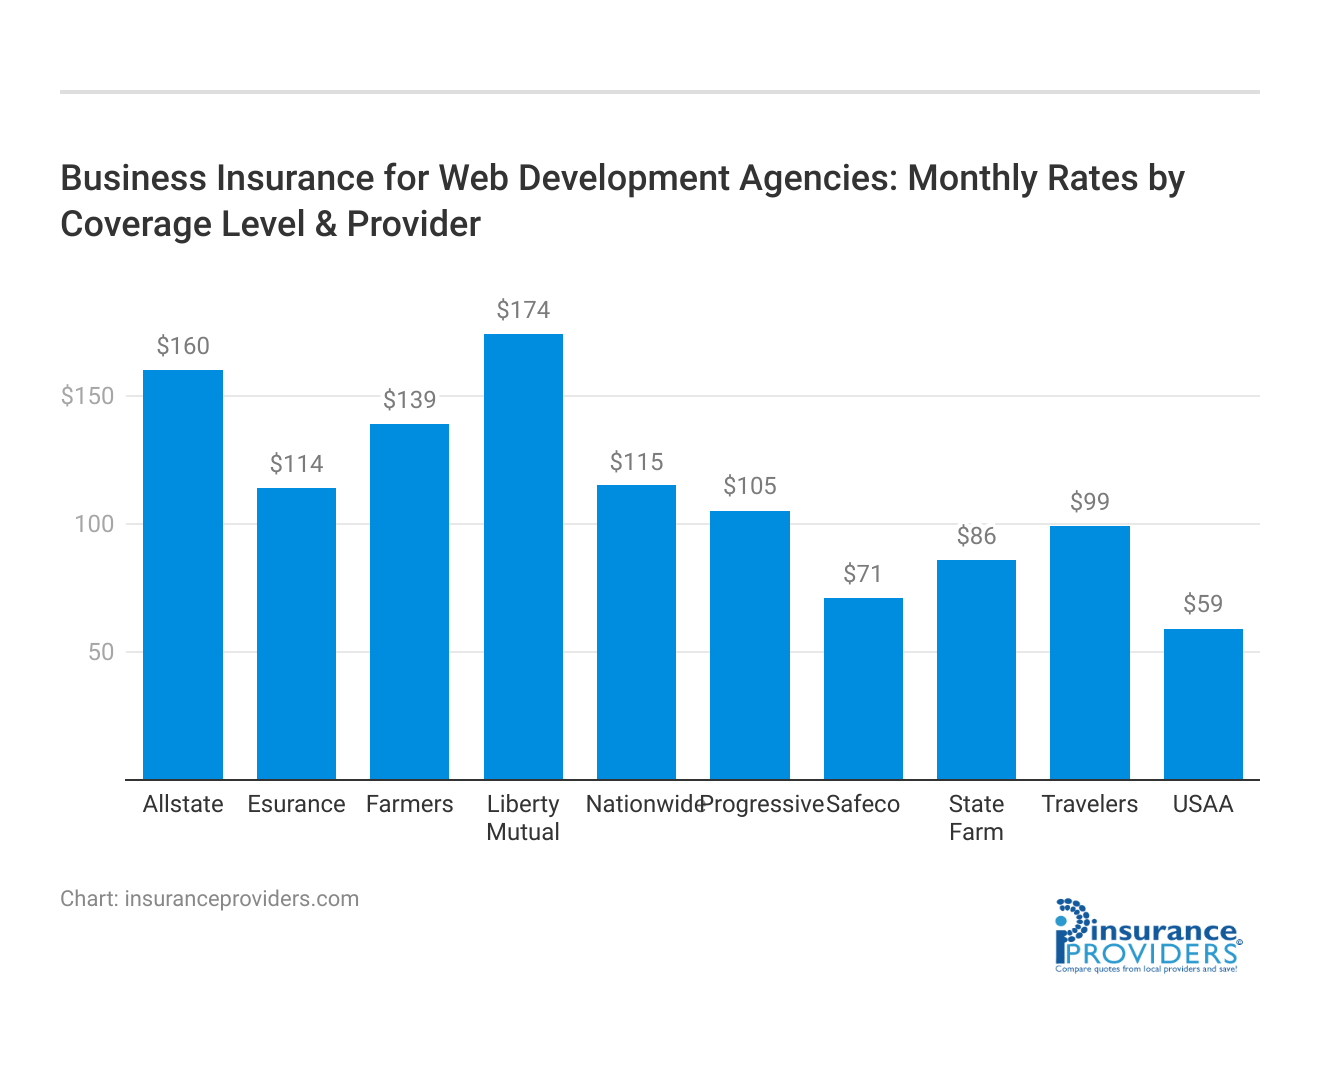 <h3>Business Insurance for Web Development Agencies: Monthly Rates by Coverage Level & Provider</h3>